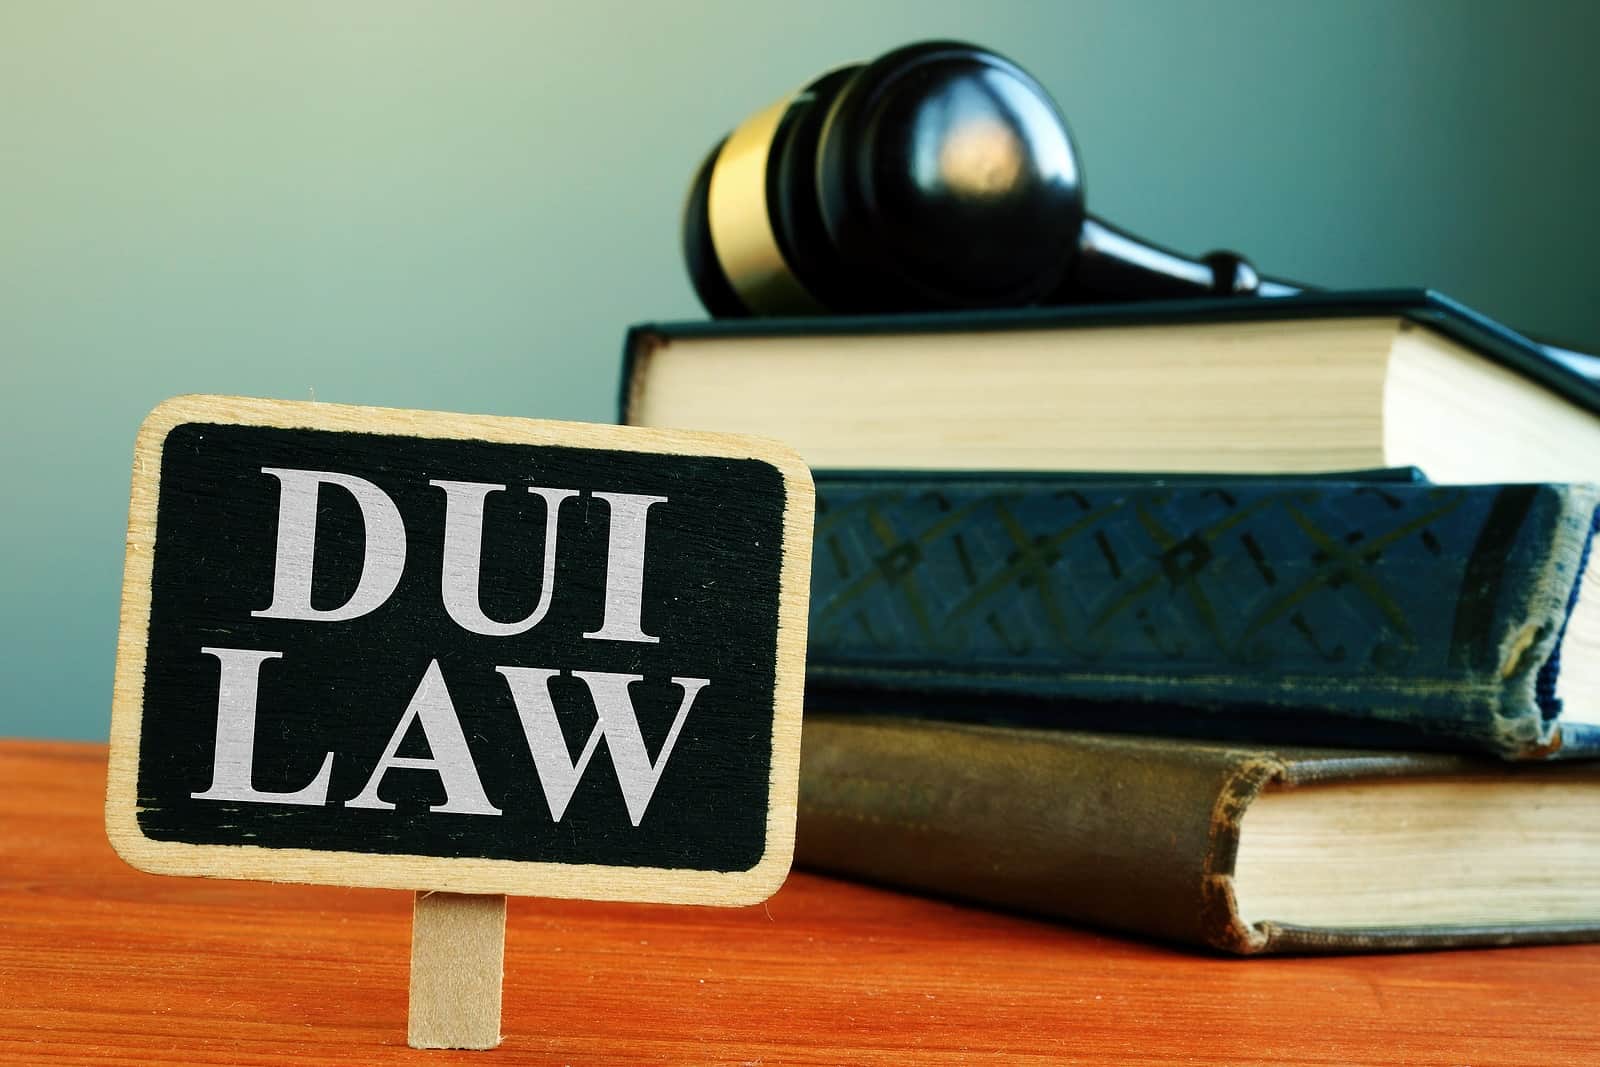 gavel on books showing dui law for repeat dui offenders